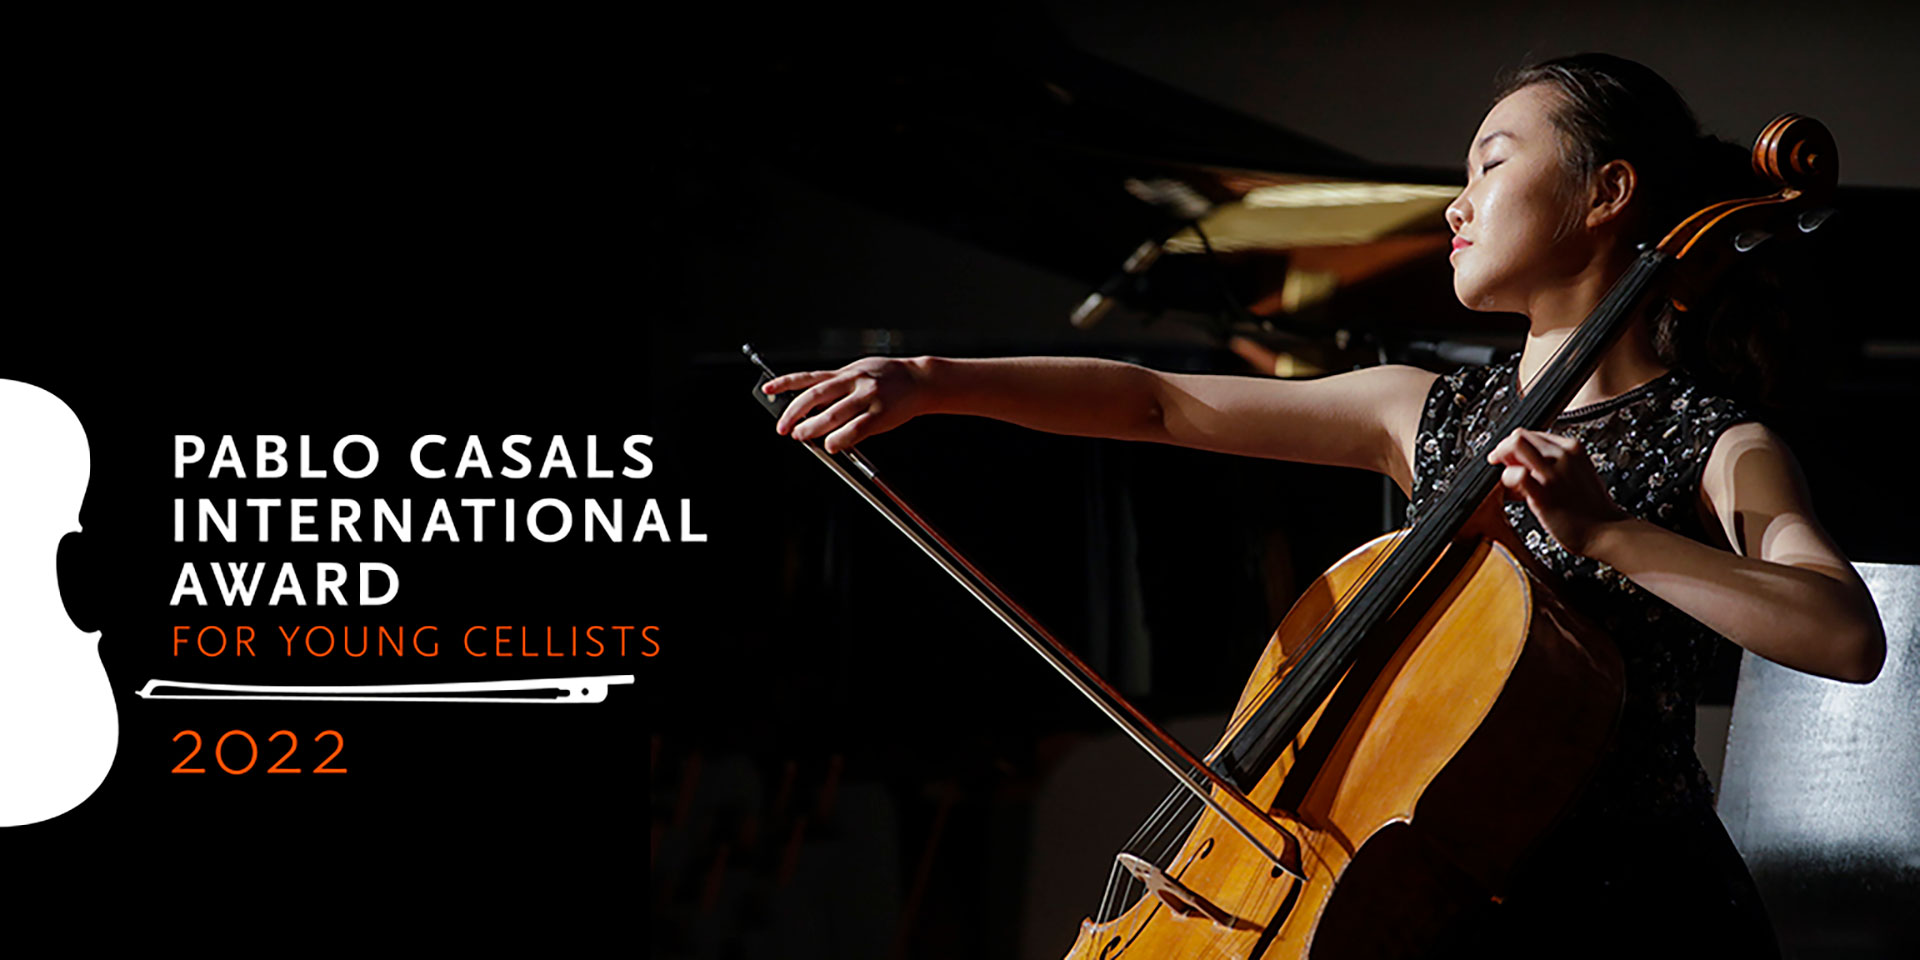 New Edition of the Pablo Casals International Award for Young Cellists